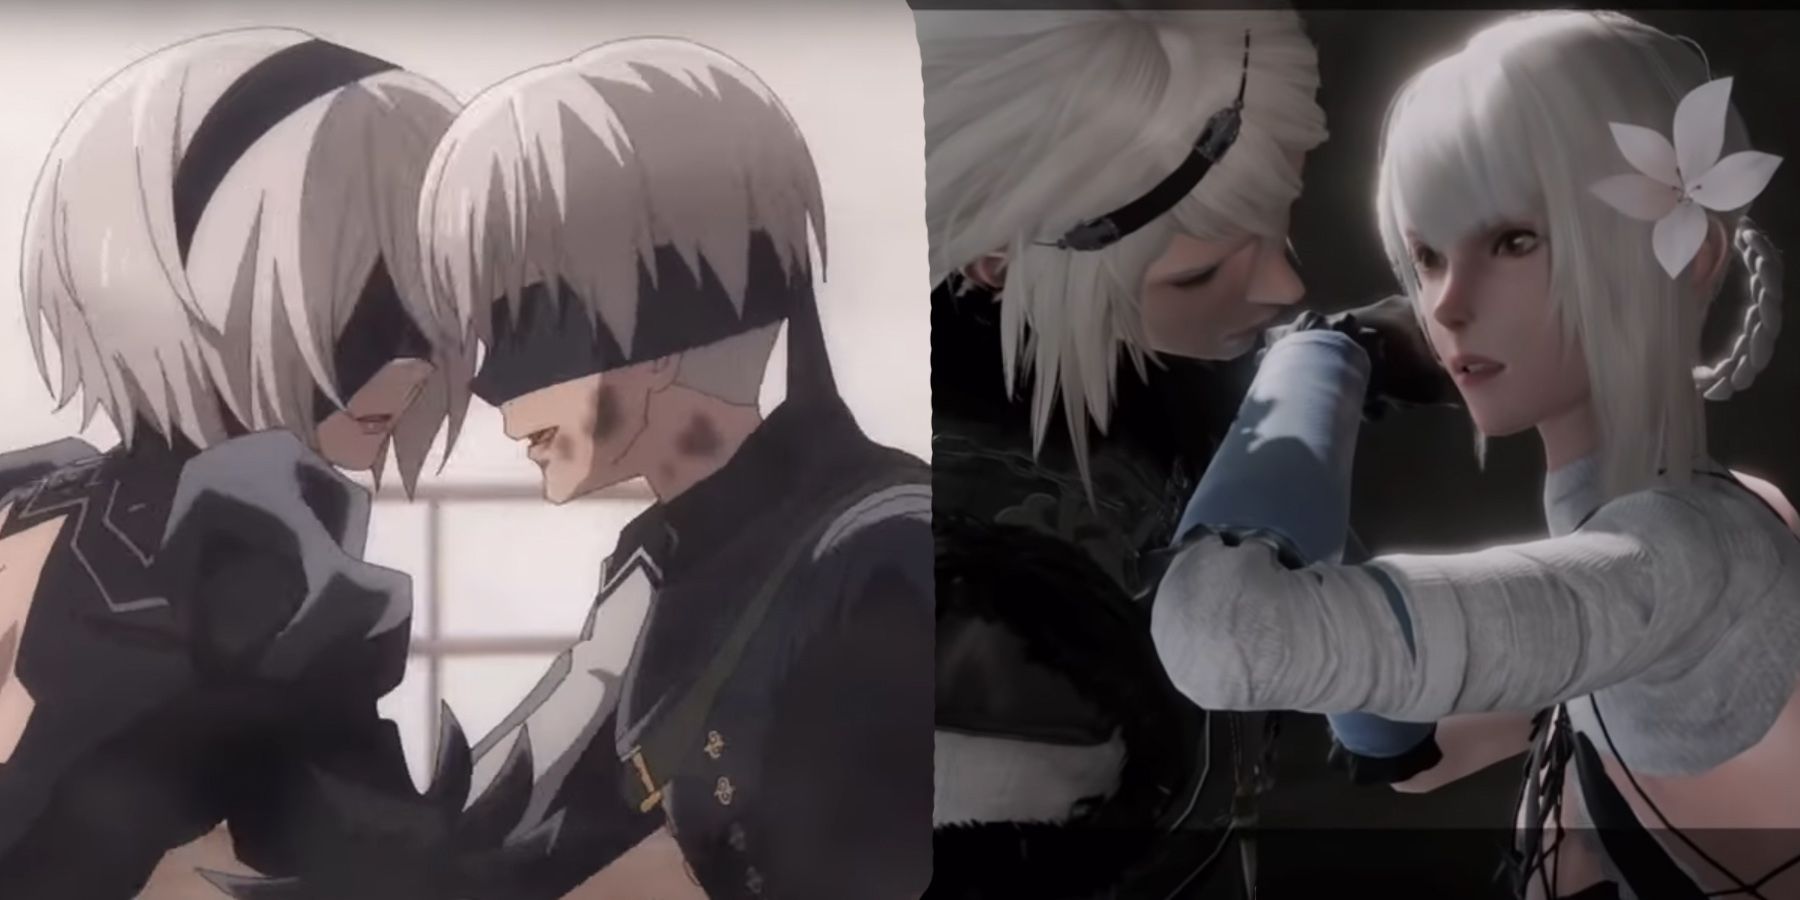 2B and 9S NieR and Kaine